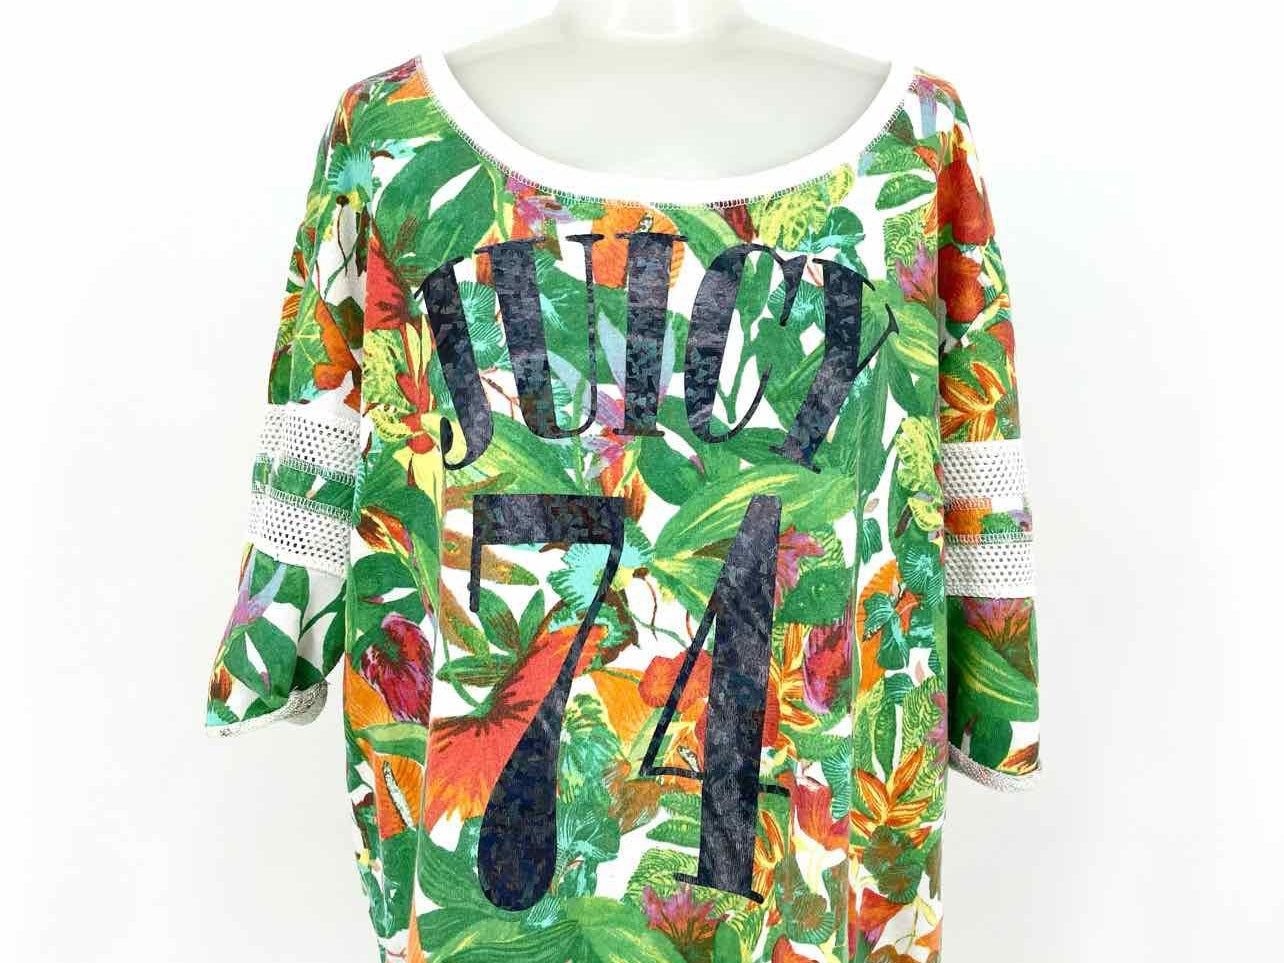 Juicy Couture Women's Green Print T-shirt Tropical Y2K Size XL Short Sleeve Top - Article Consignment